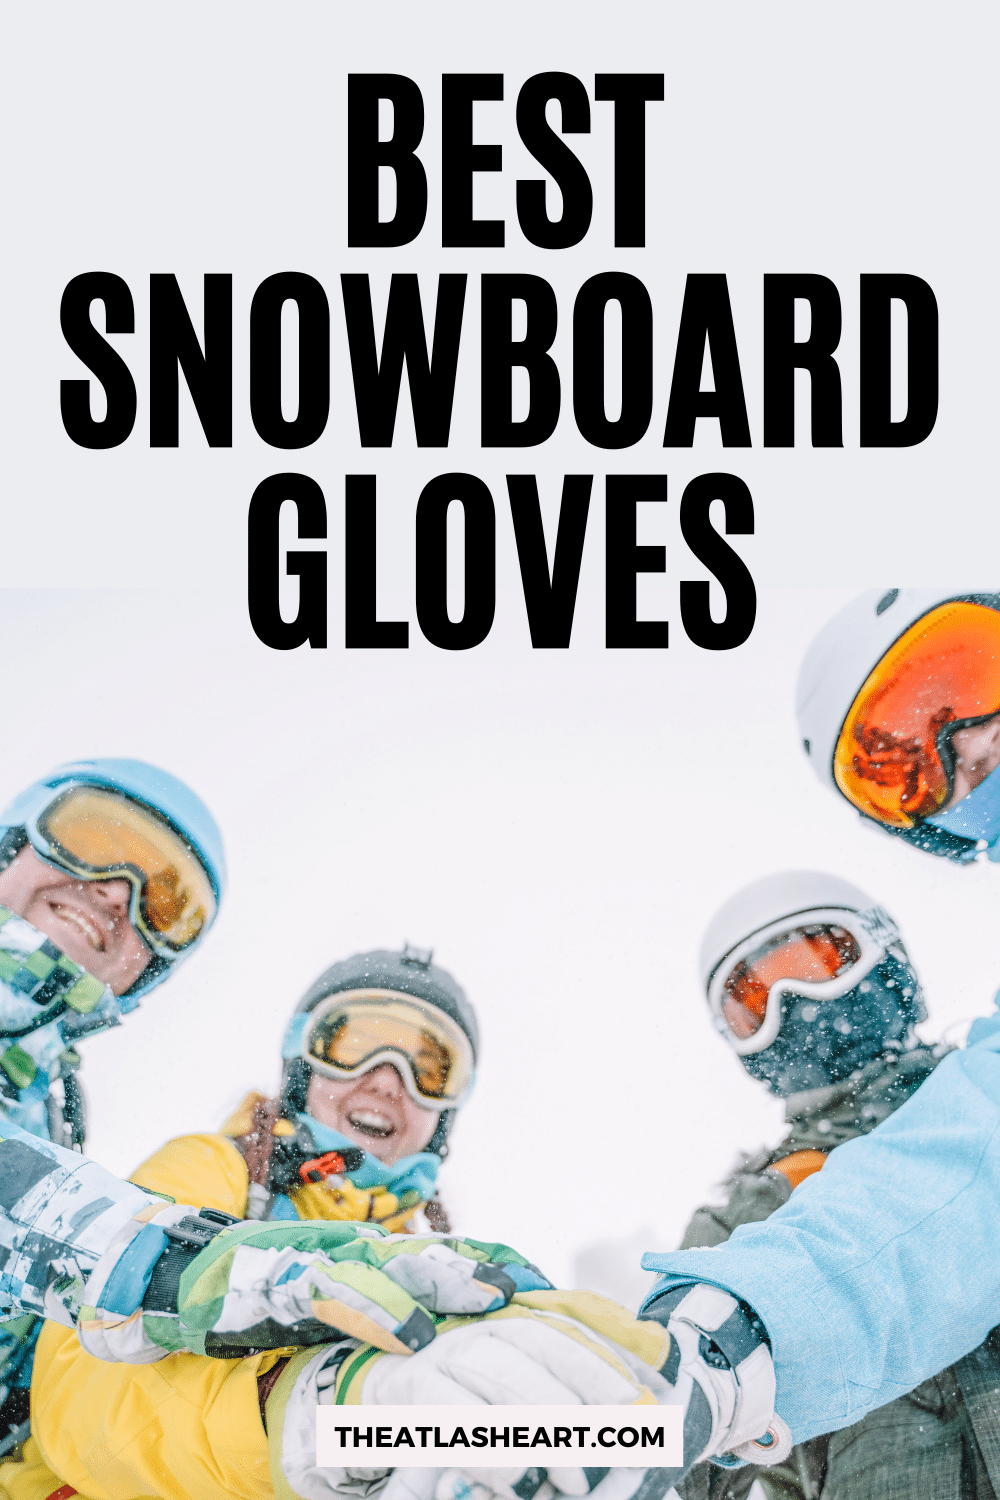 11 Best Snowboard Gloves to Stay Warm This Winter (2022 Buying Guide)